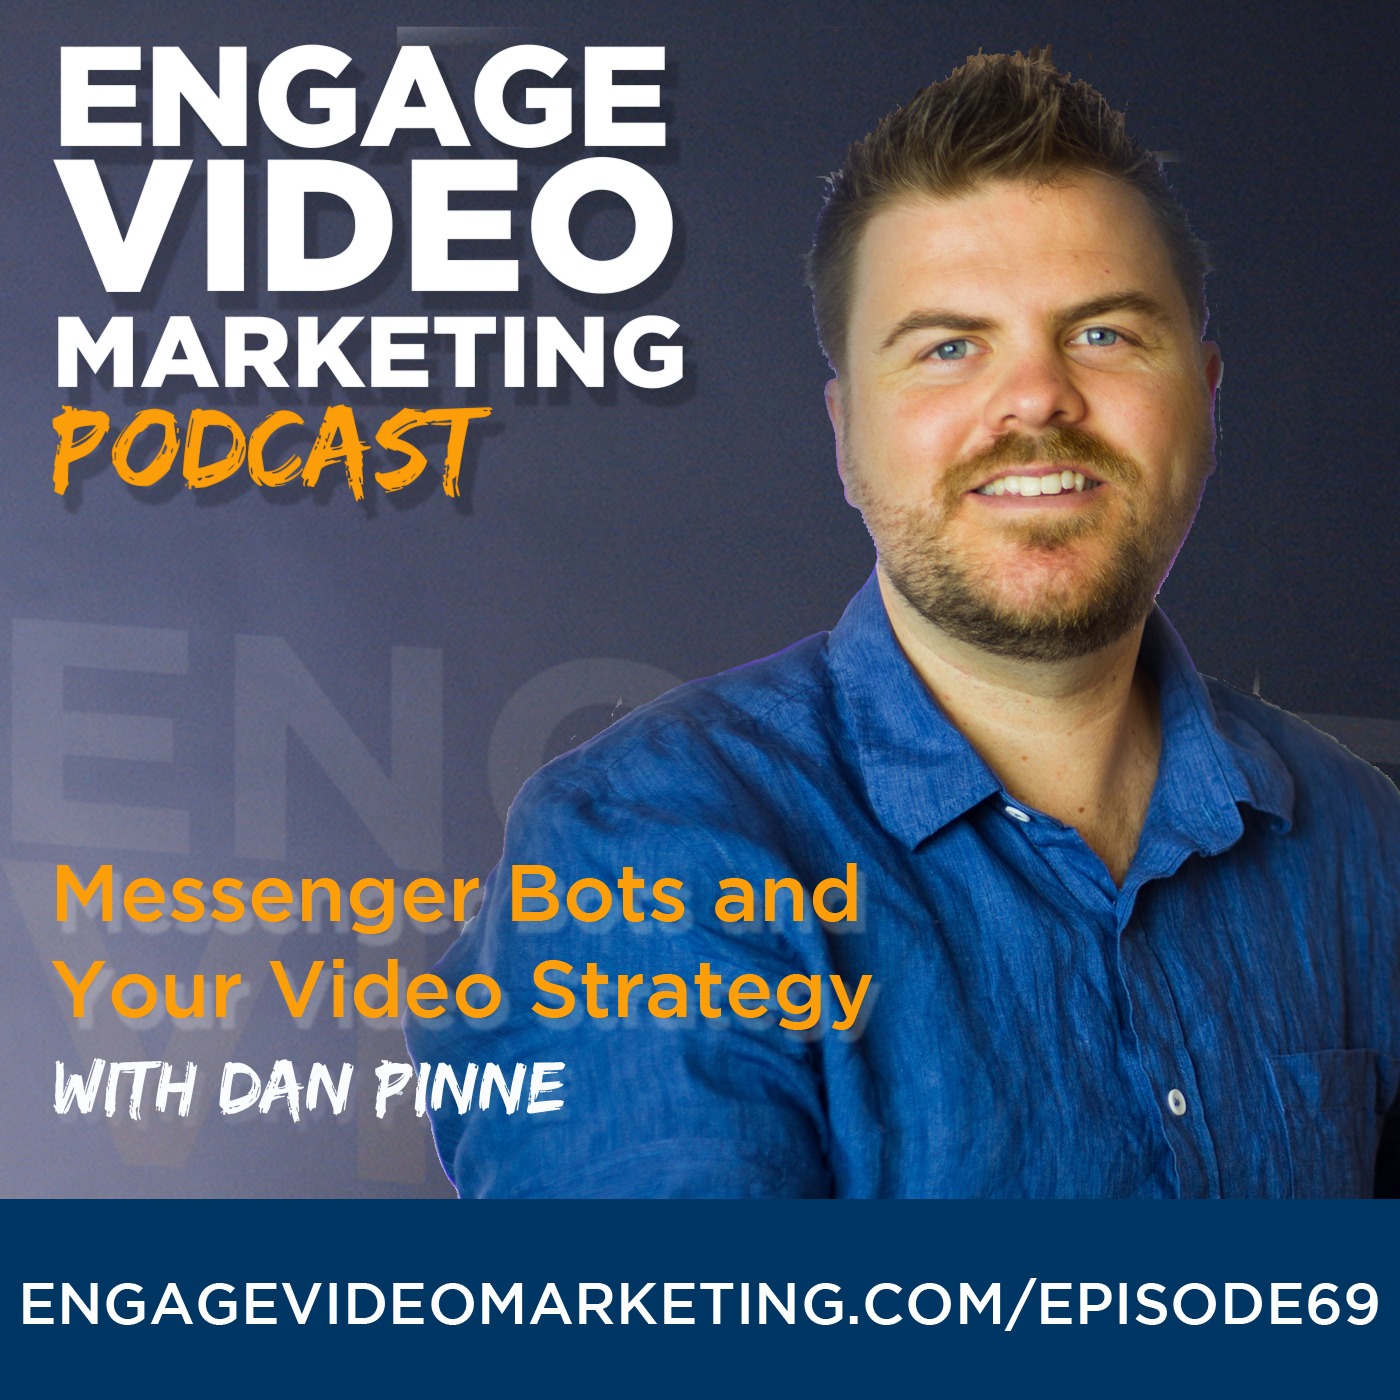 Messenger Bots and Your Video Strategy with Dan Pinne